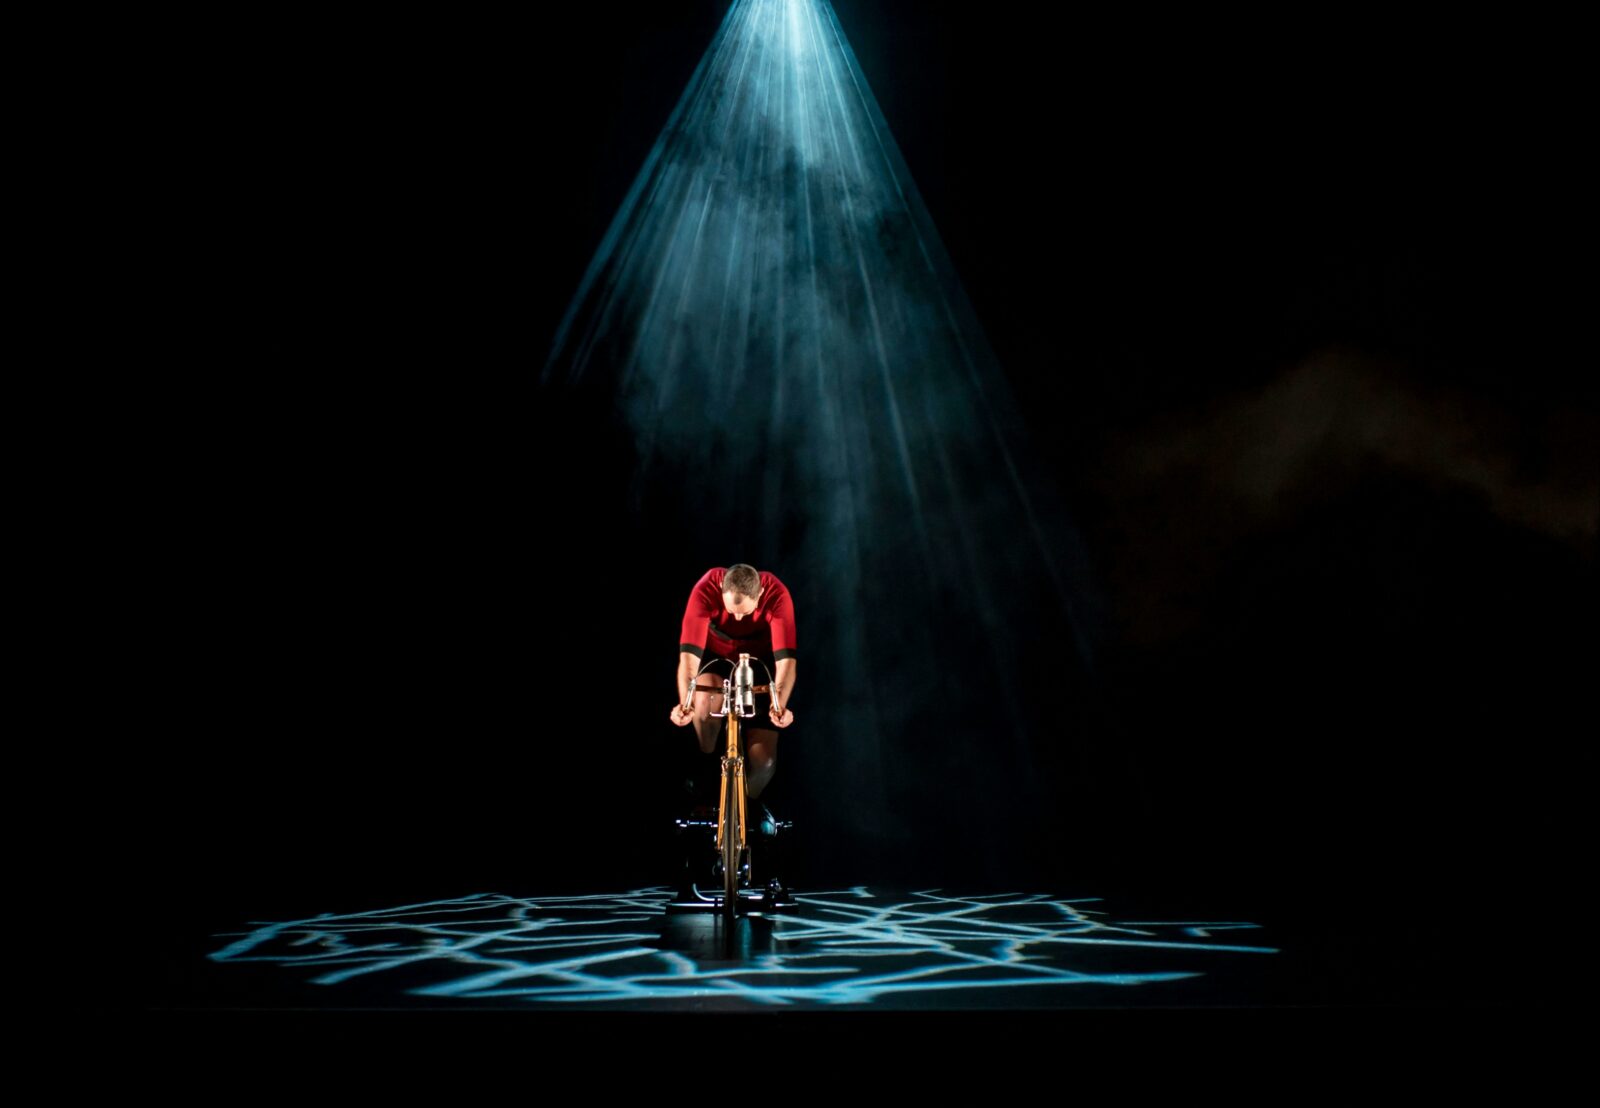 A man lit by a blue textured spotlight is riding a bicycle on stage wearing a red riding suit.